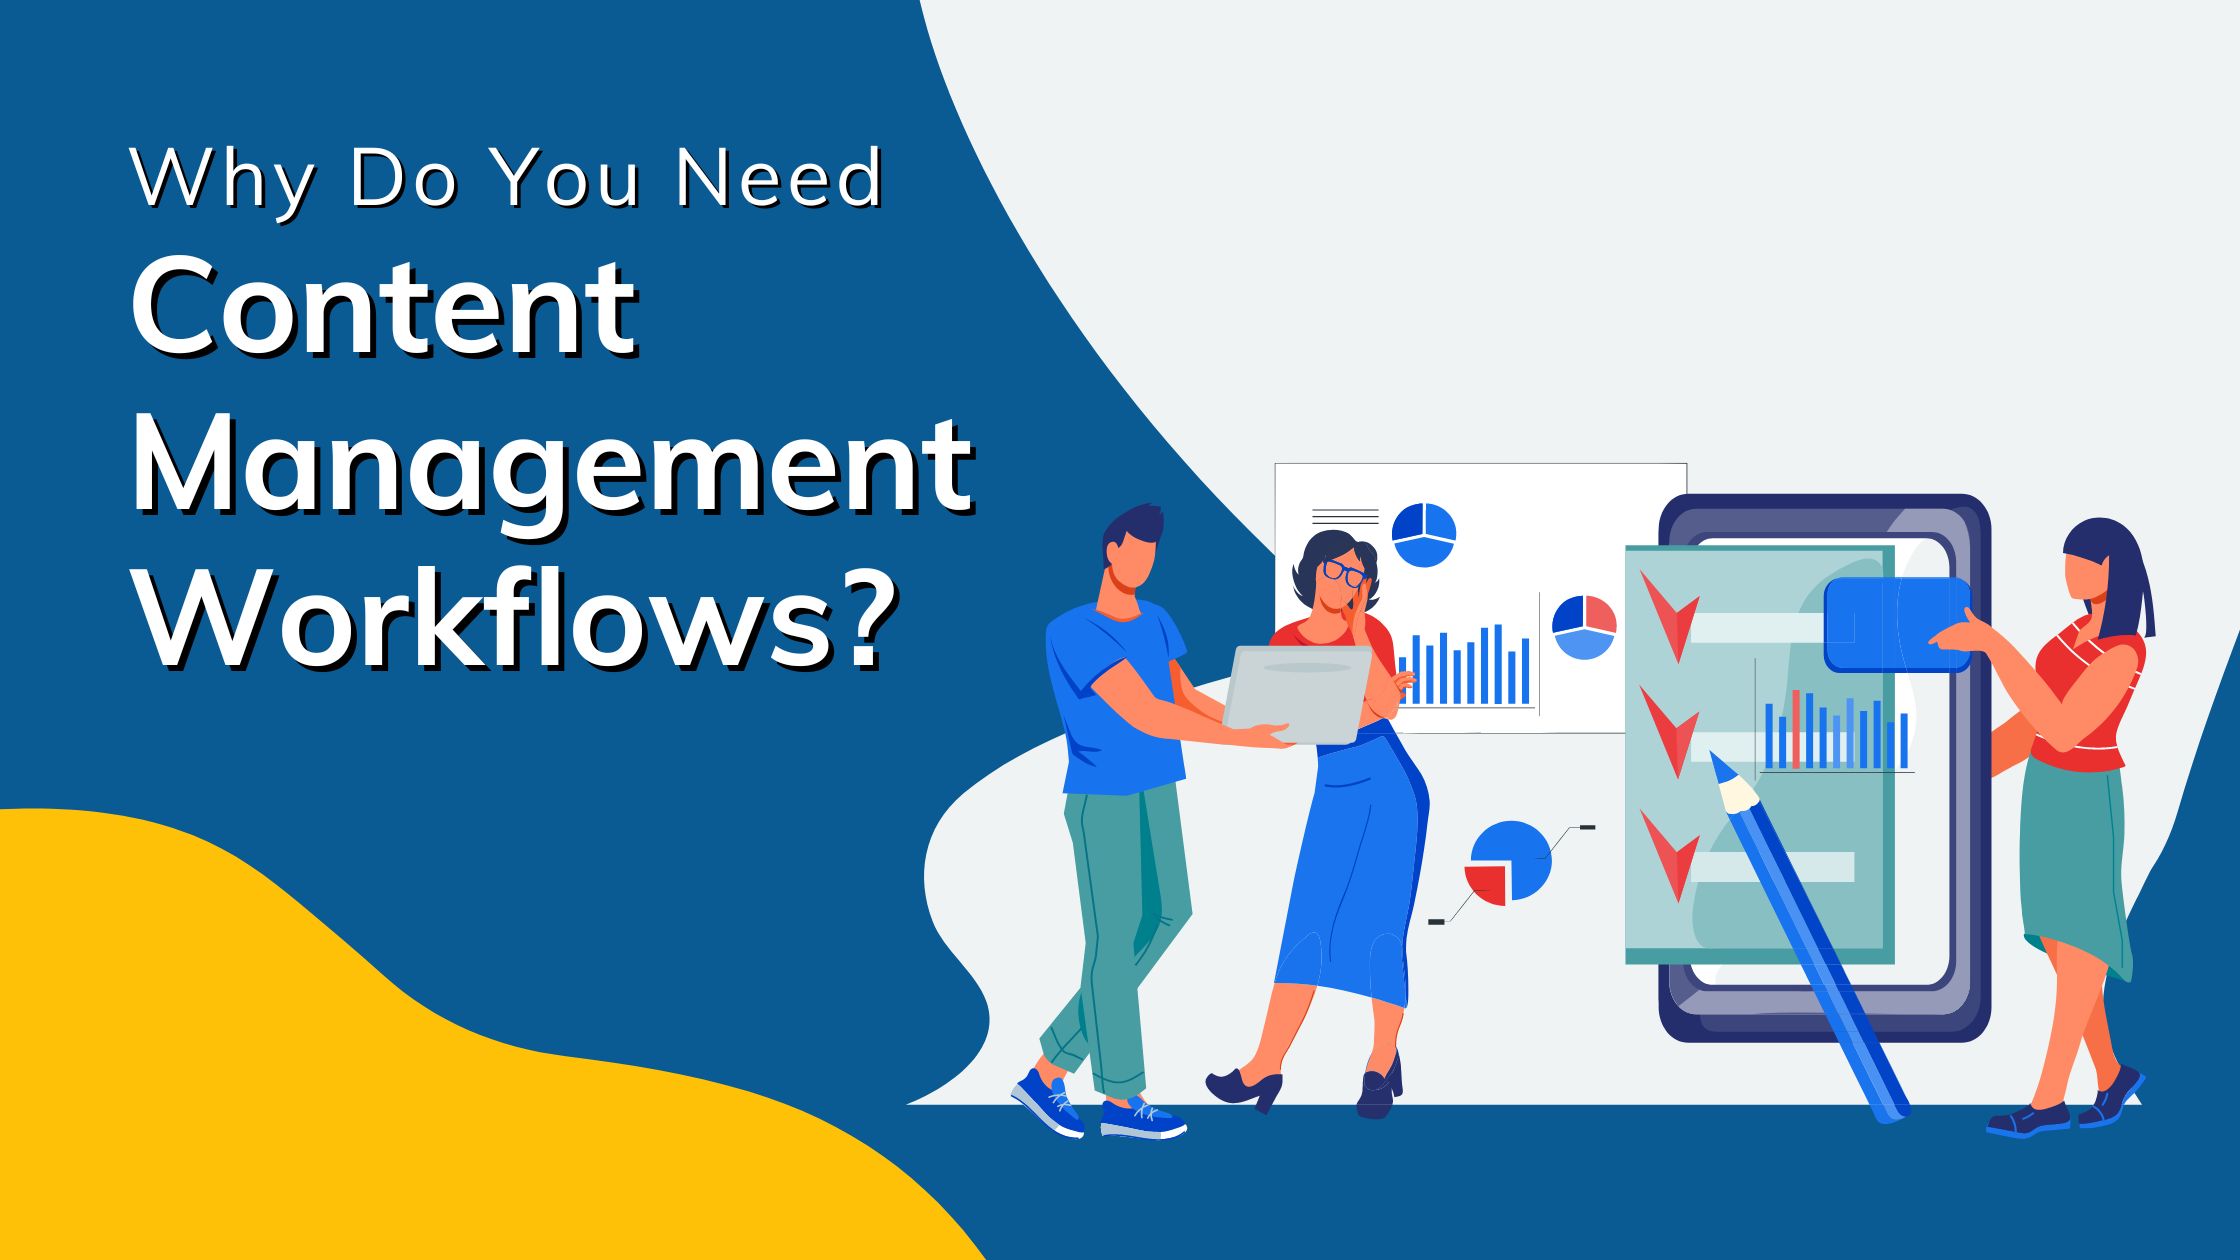 Why Do You Need Content Management Workflows?